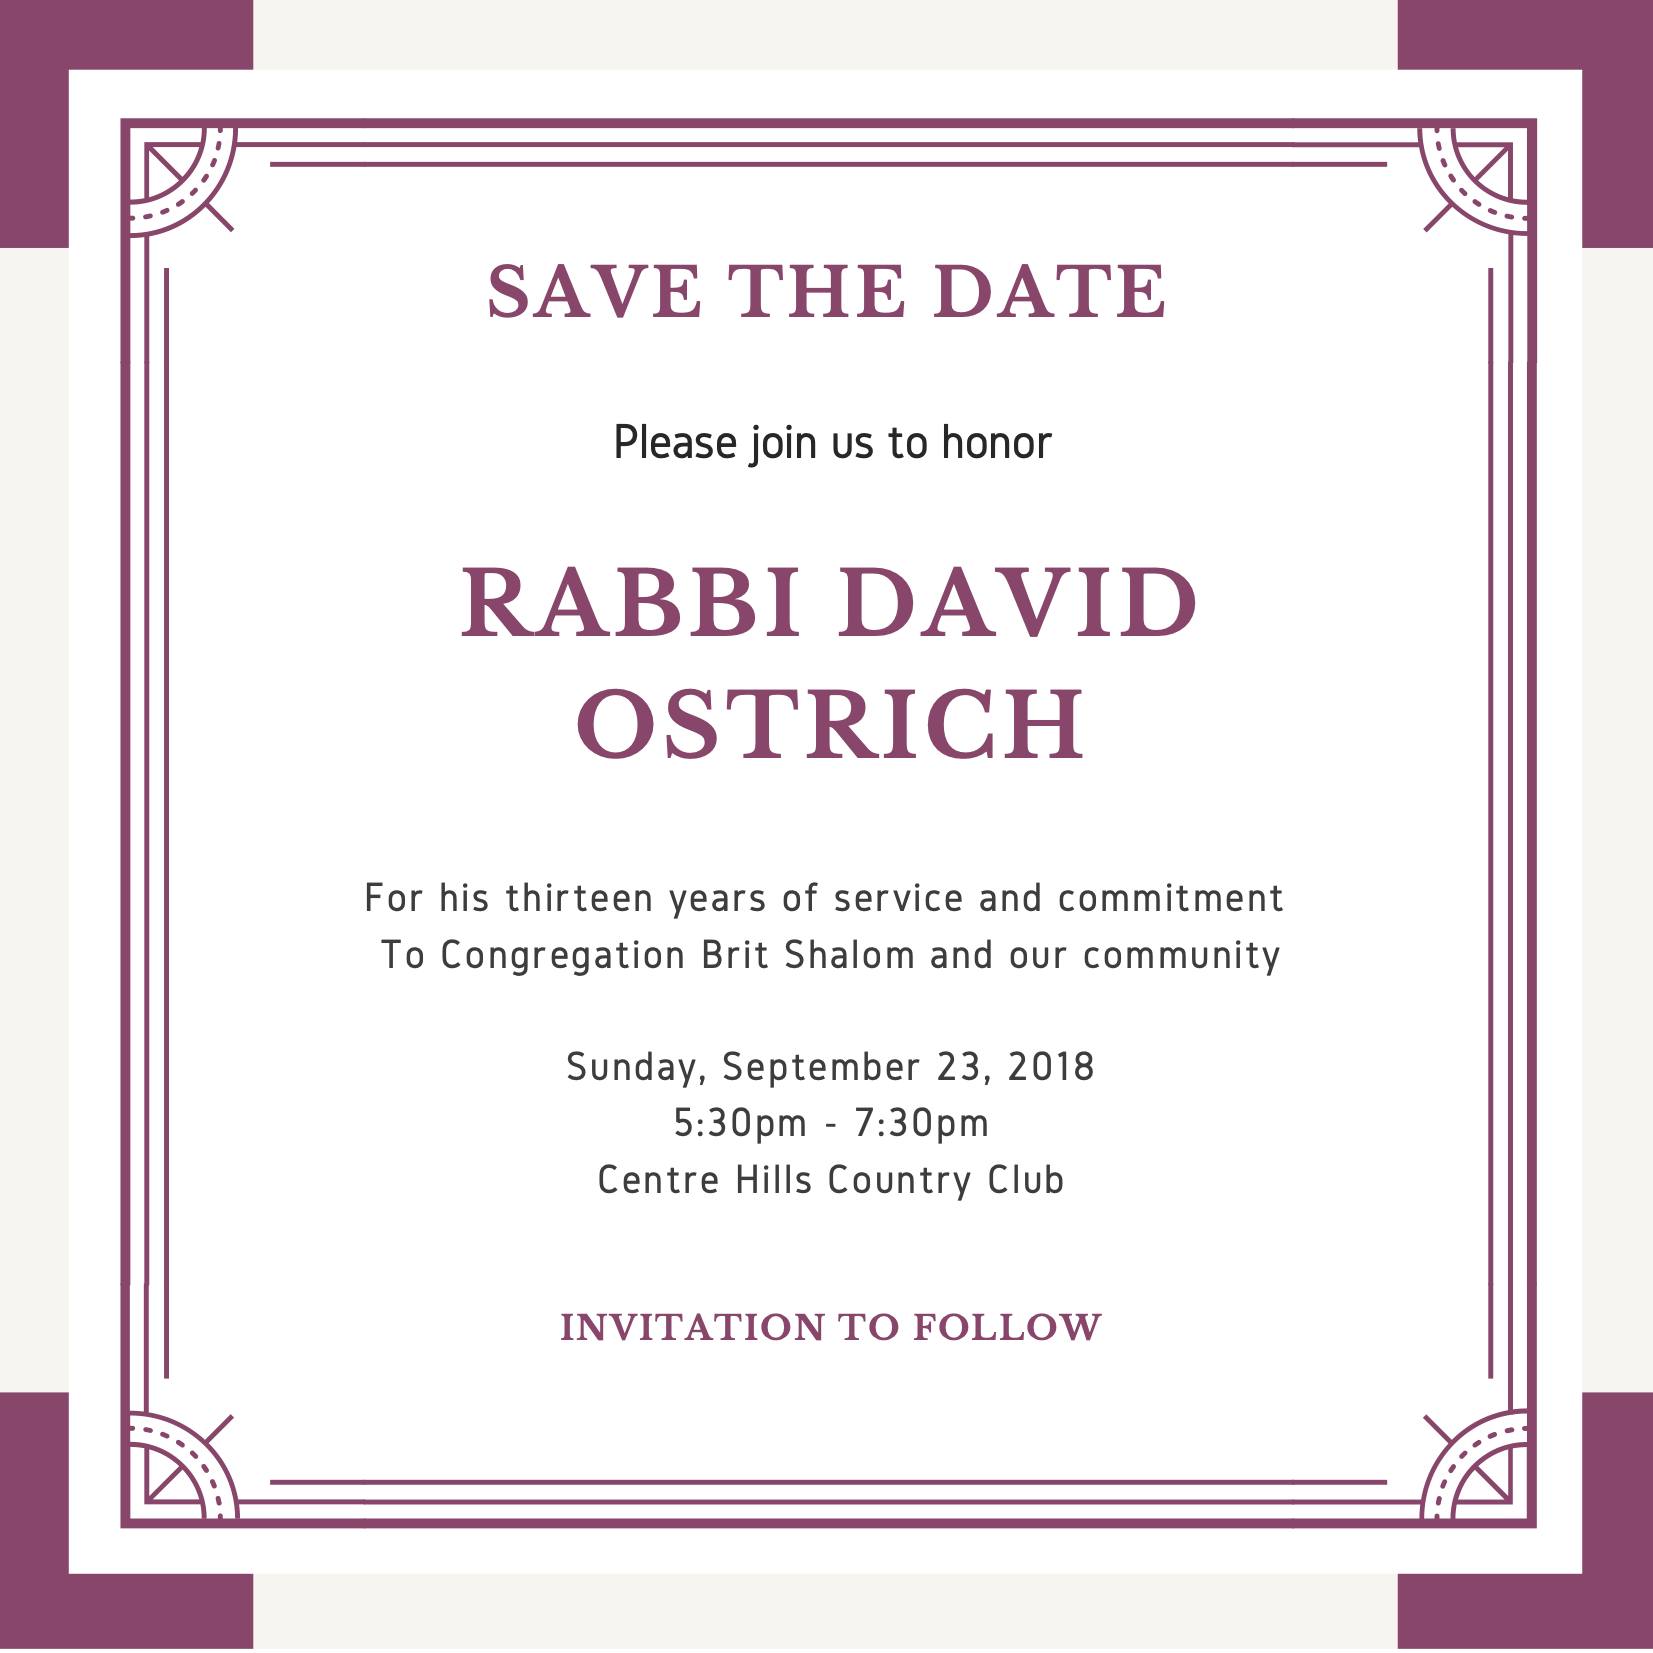 Save the Date for Rabbi's Celebration